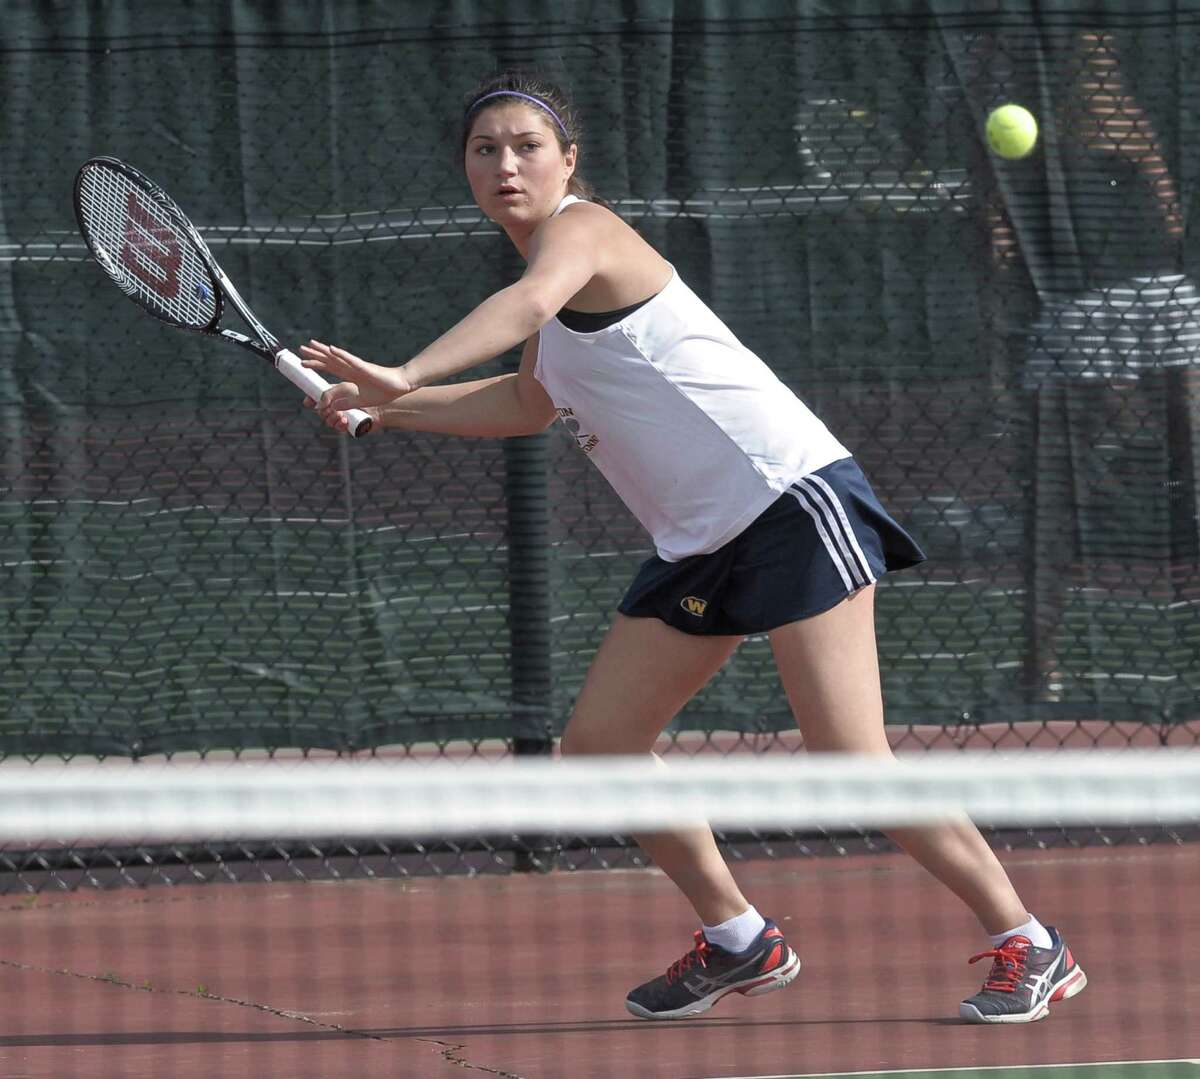 Weston's Cayla Koch competes in the No.1 singles match of the SWC girls tennis championship between Weston and Joel Barlow high schools. Played on Wednesday, May 20, 2015, at Joel Barlow High School, in Redding, Conn.